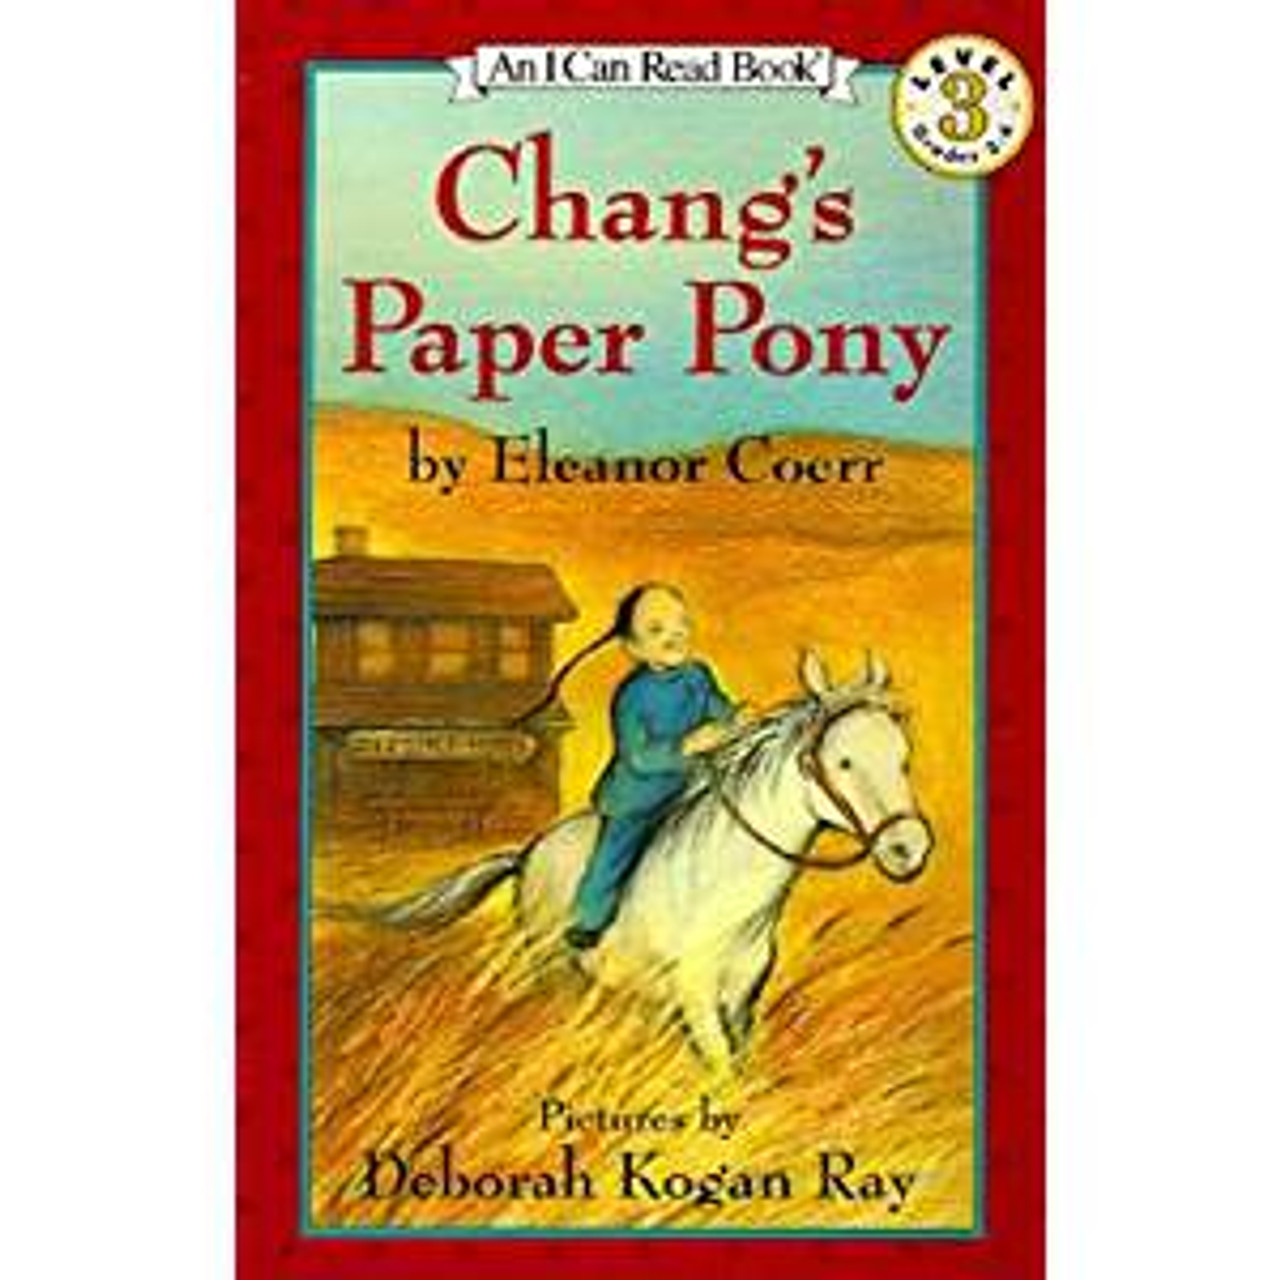  In San Francisco during the 1850's gold rush, Chang, the son of Chinese immigrants, wants a pony but cannot afford one until his friend Big Pete finds a solution.